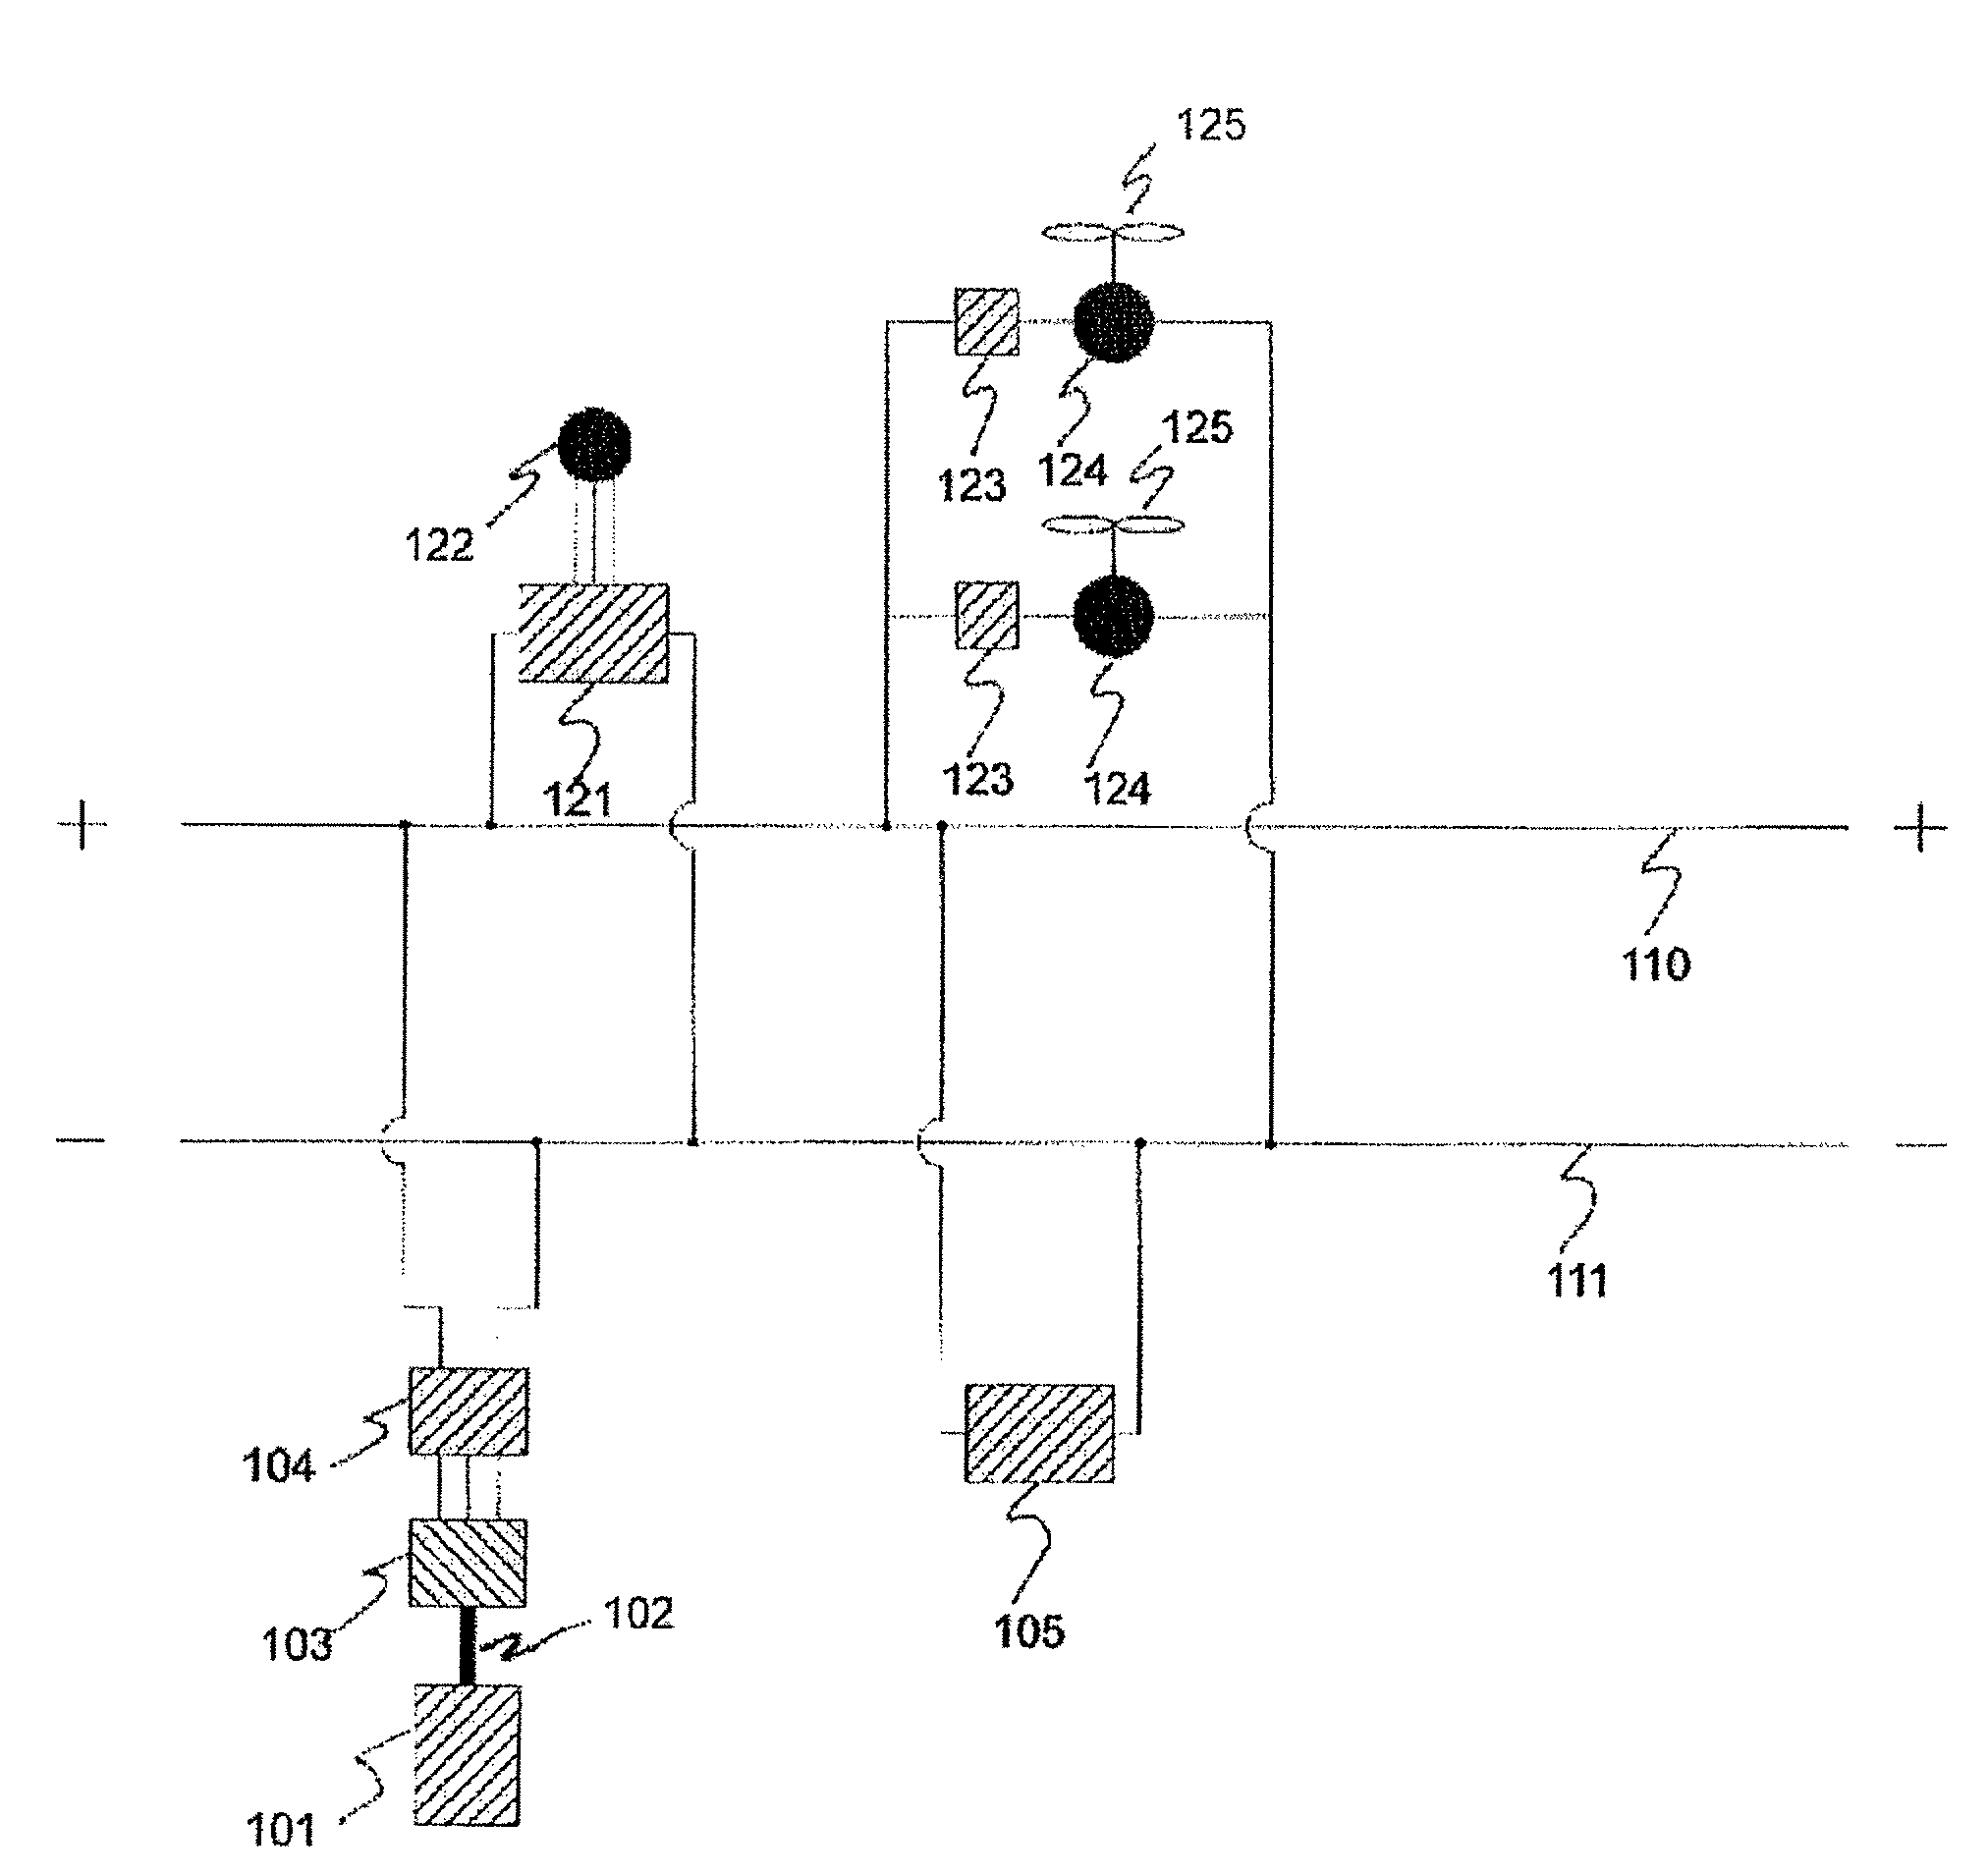 Marine power train system and method of storing energy in a marine vehicle